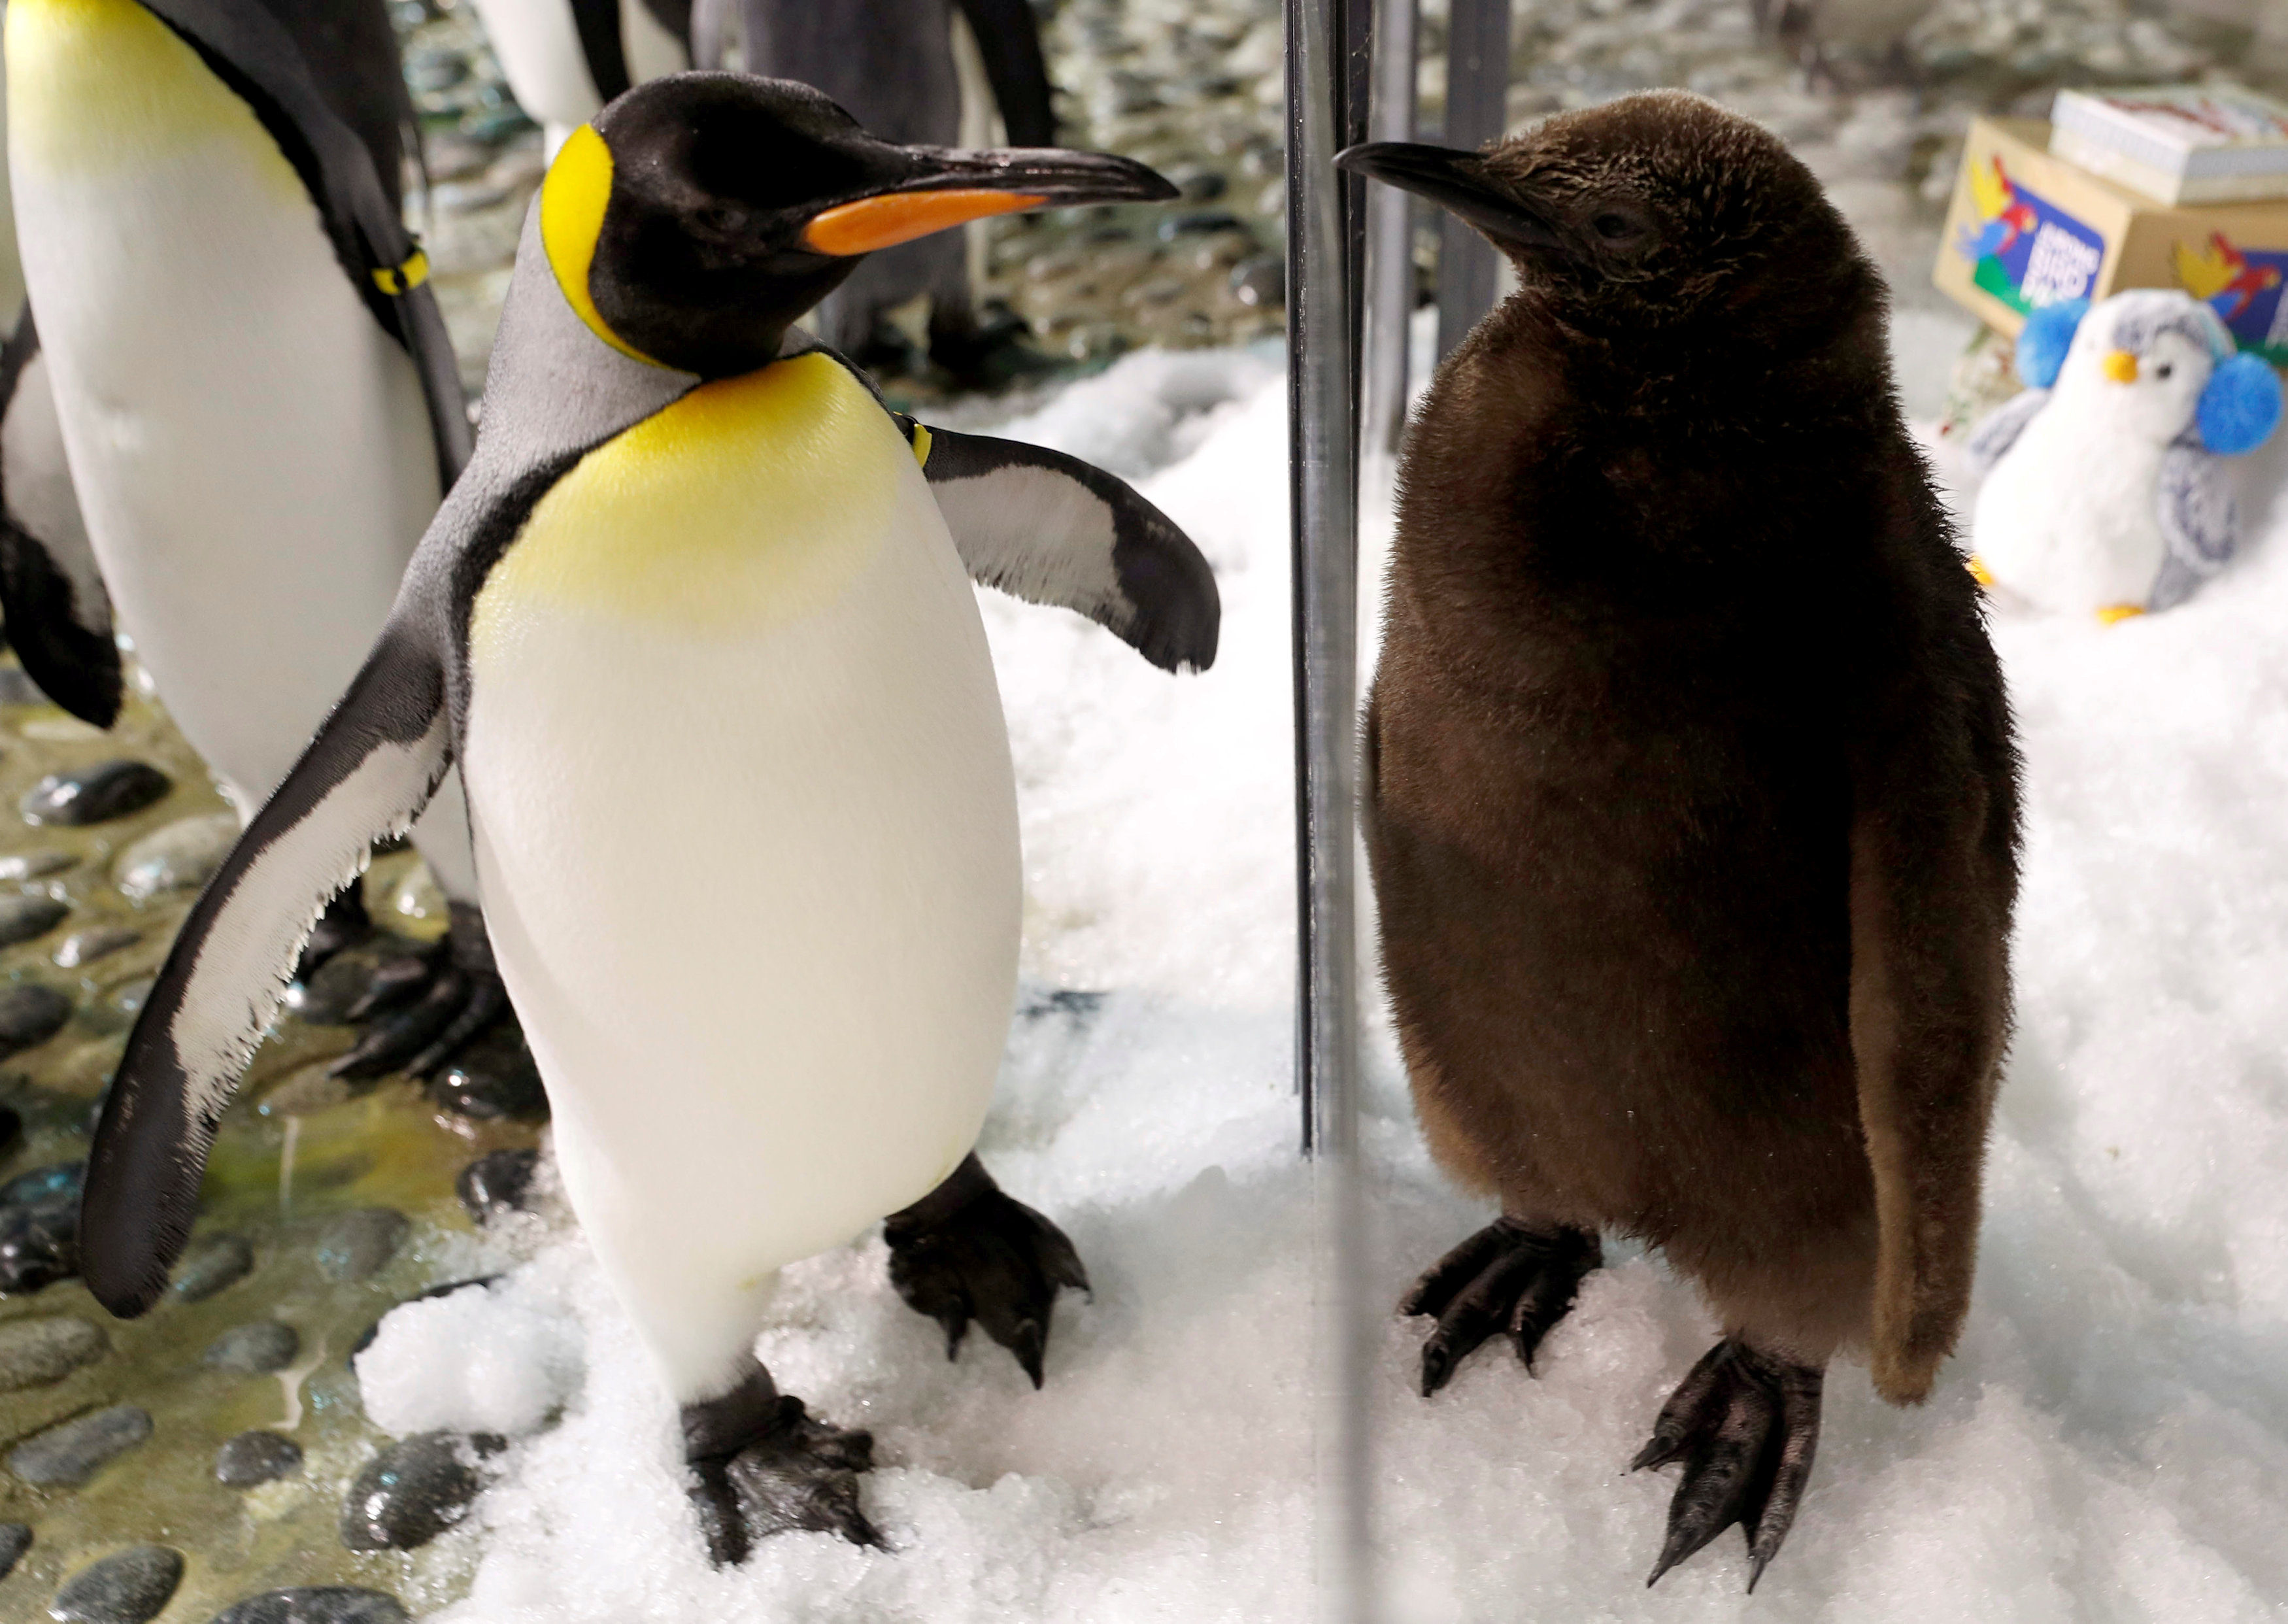 Baby penguin 'Maru' takes first public waddle in Singapore